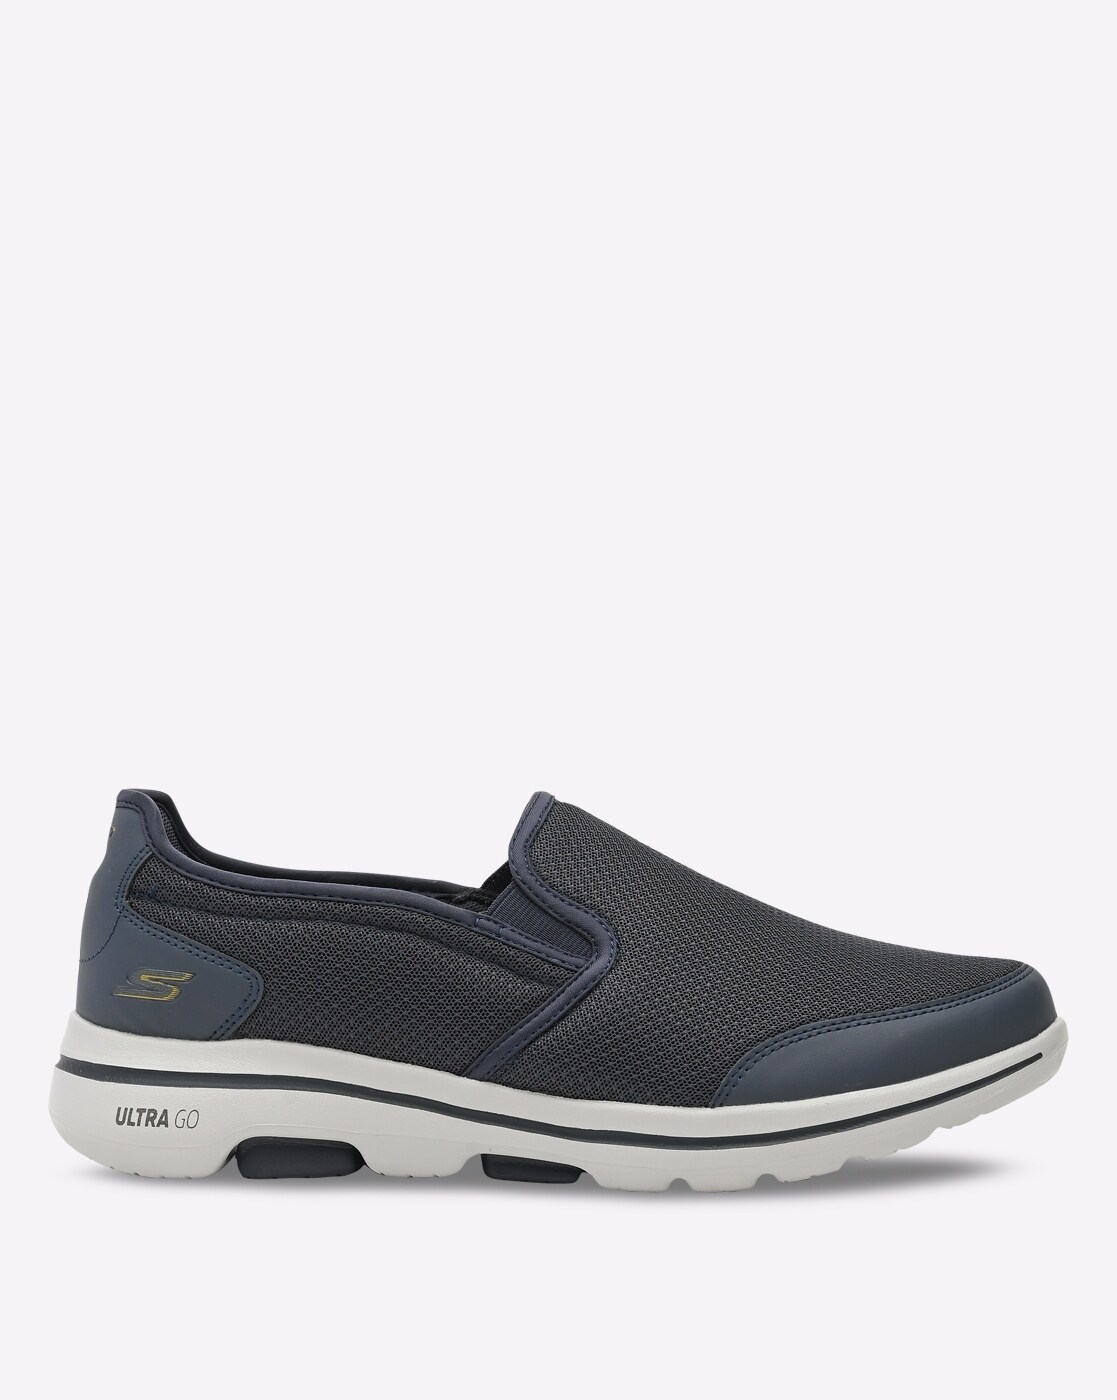 sentido común Centrar Suministro Buy Navy Blue Sports Shoes for Men by Skechers Online | Ajio.com